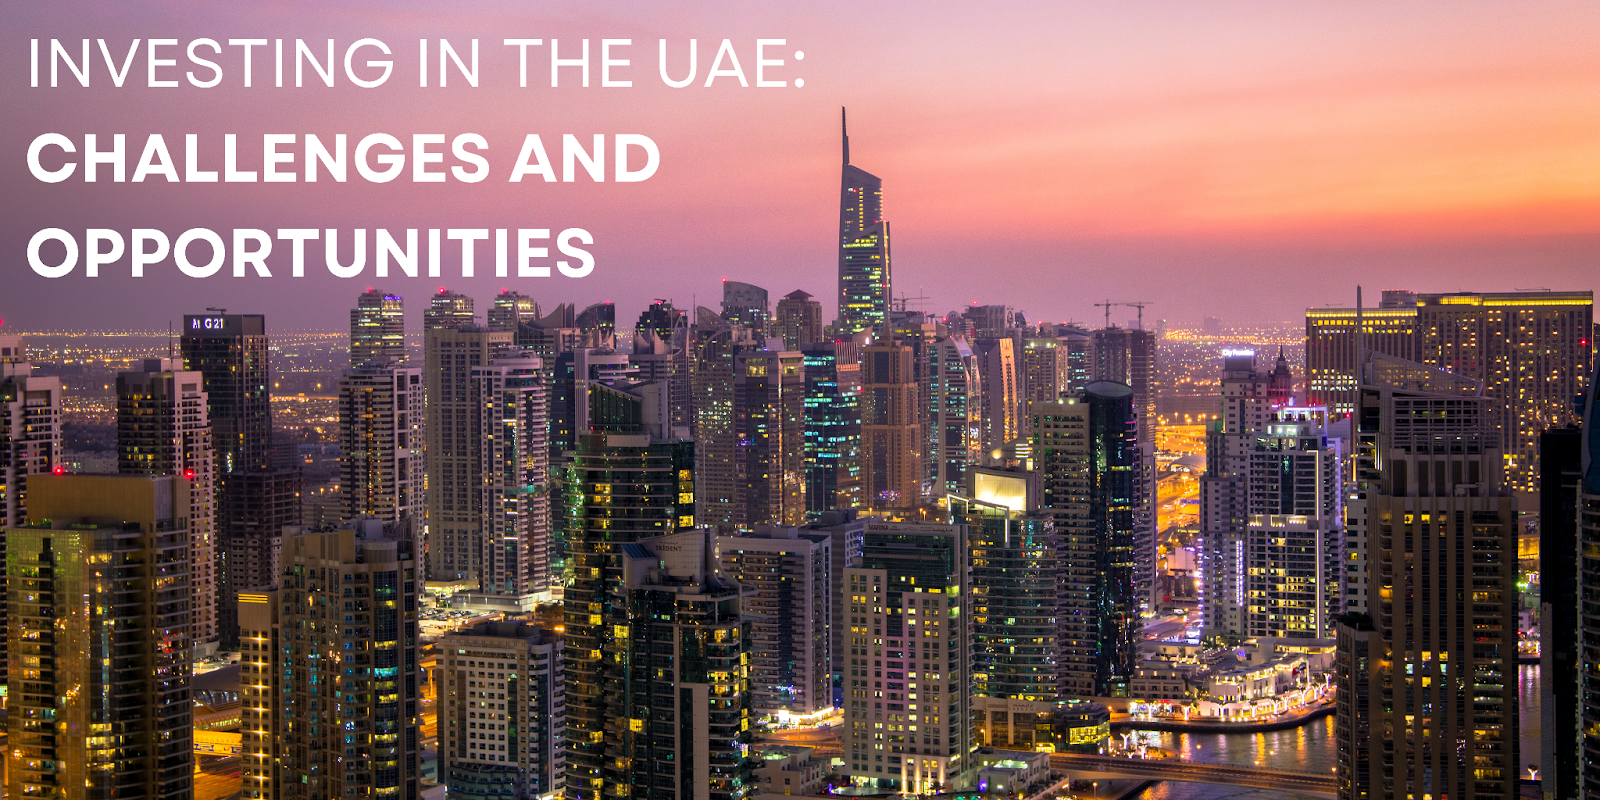 Investing in the UAE: Challenges and Opportunities